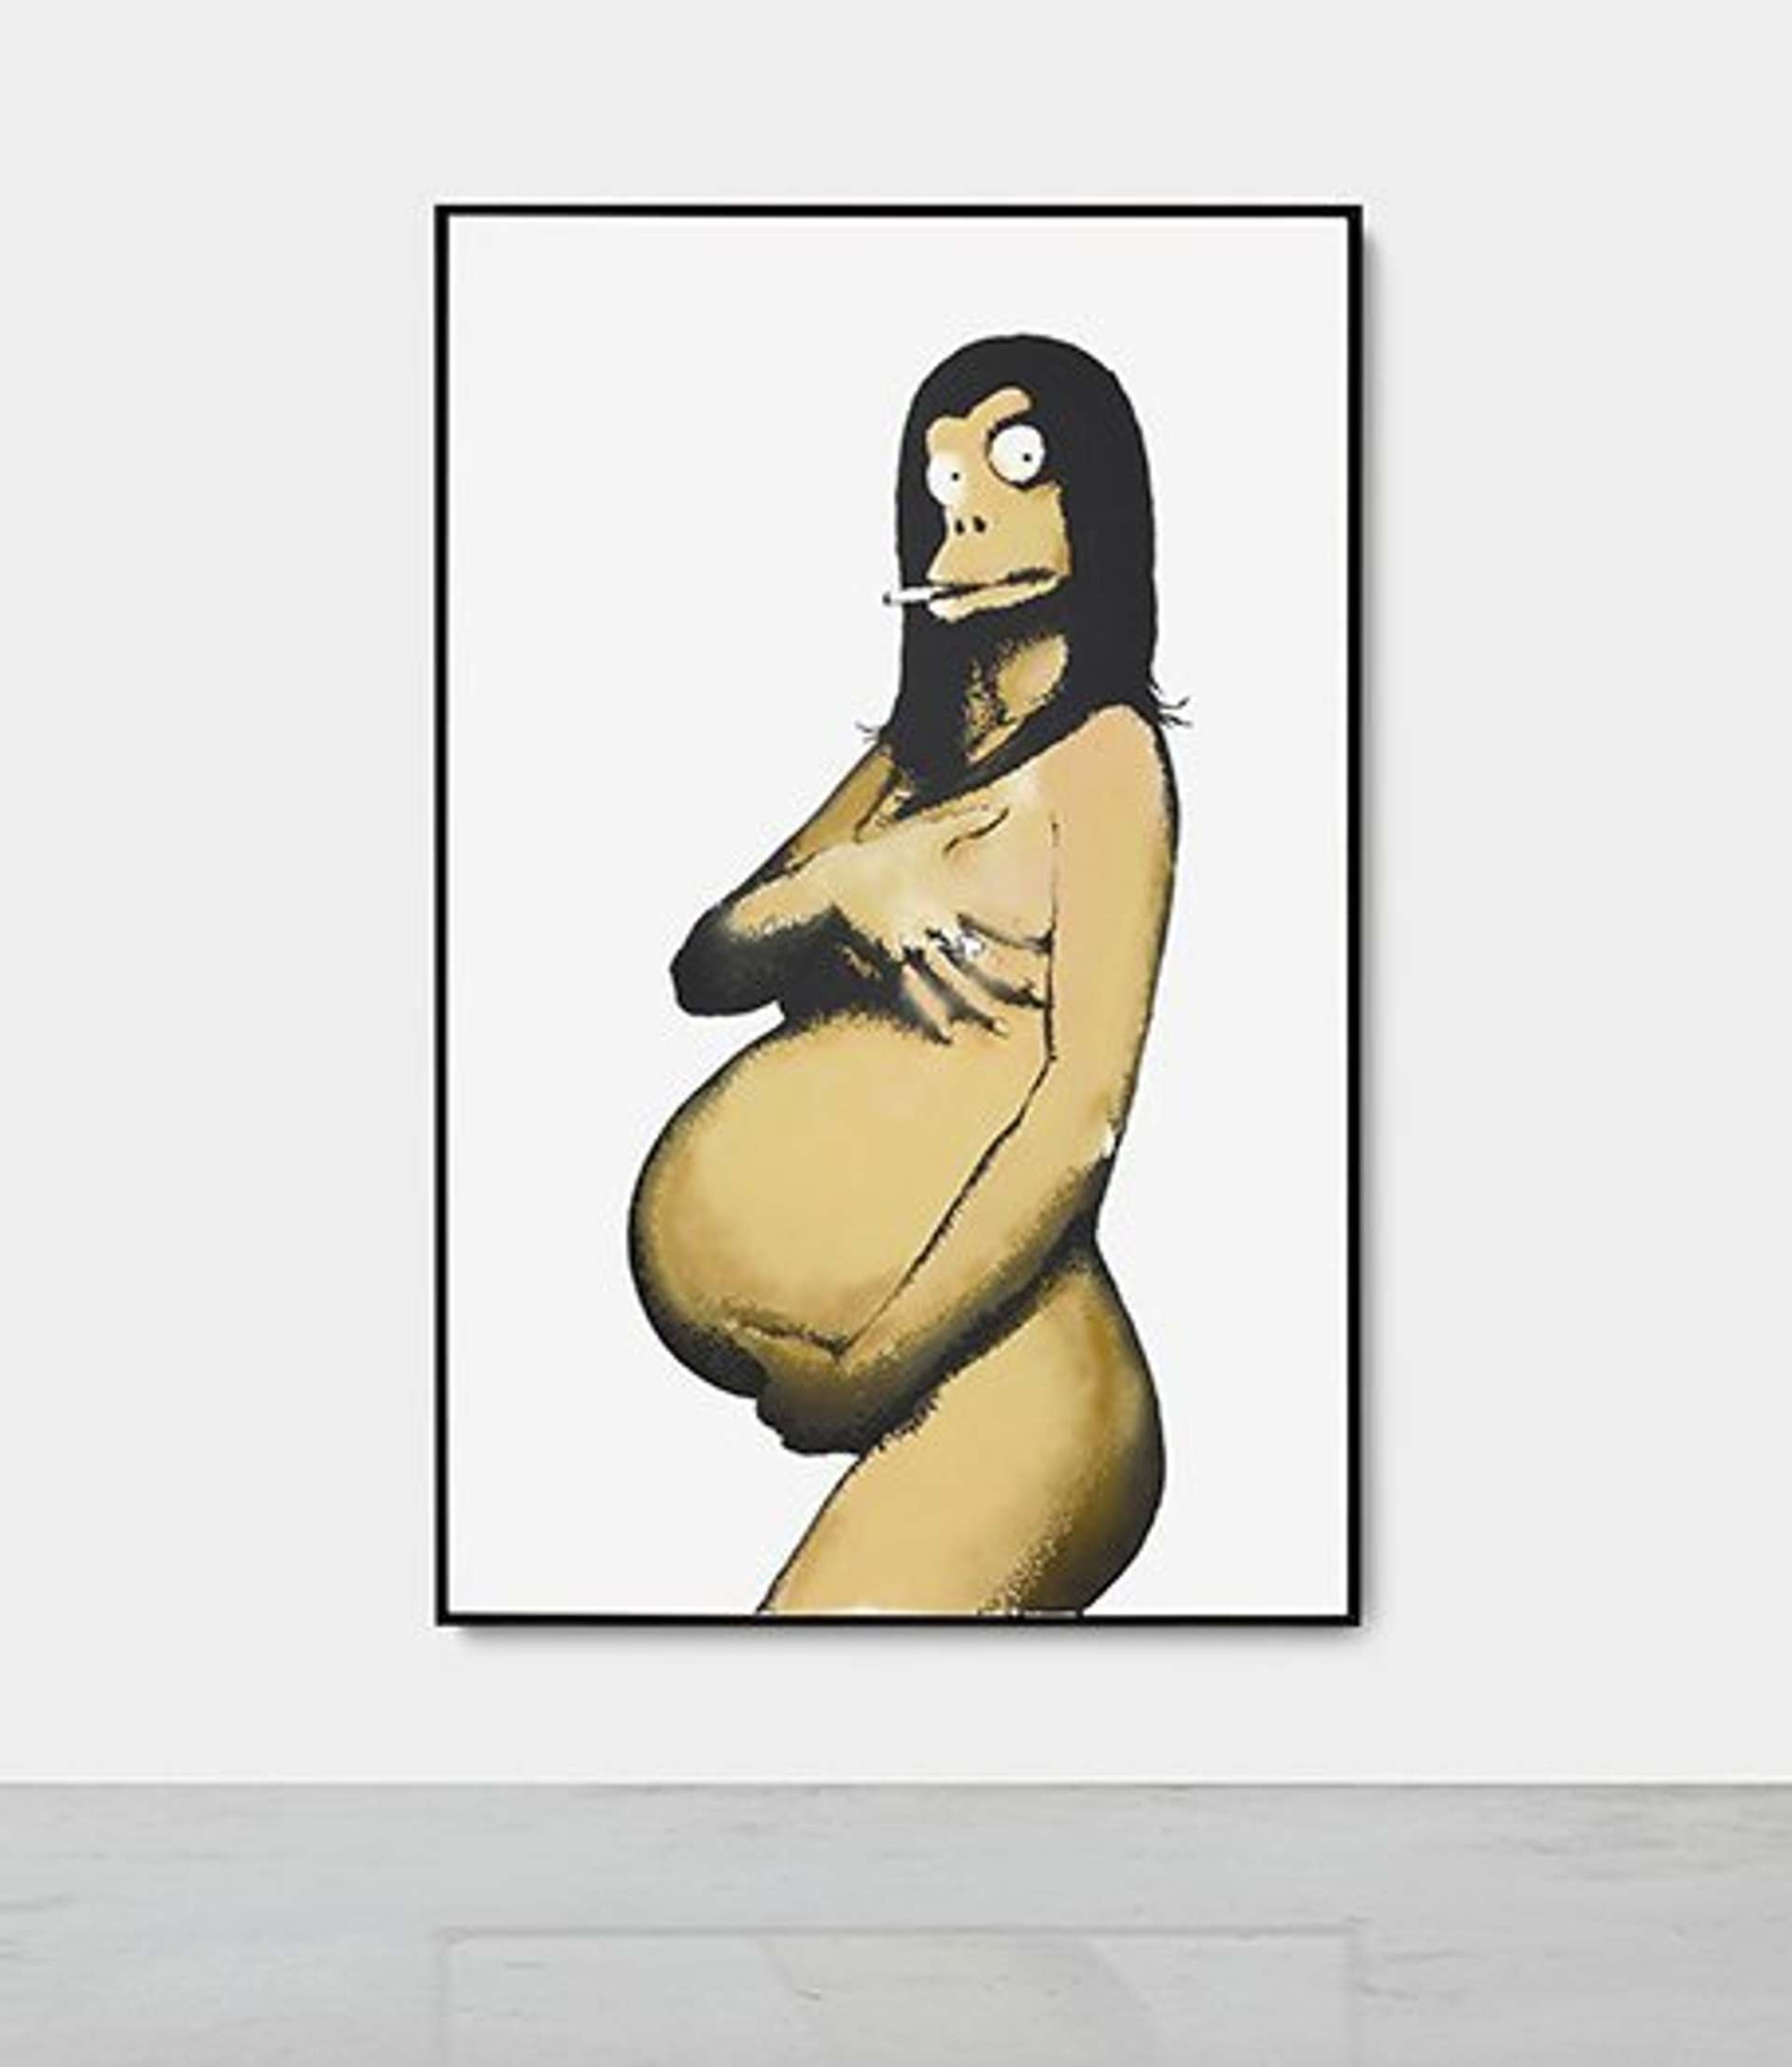 Original Concept For Barely Legal Poster (After Demi Moore) by Banksy